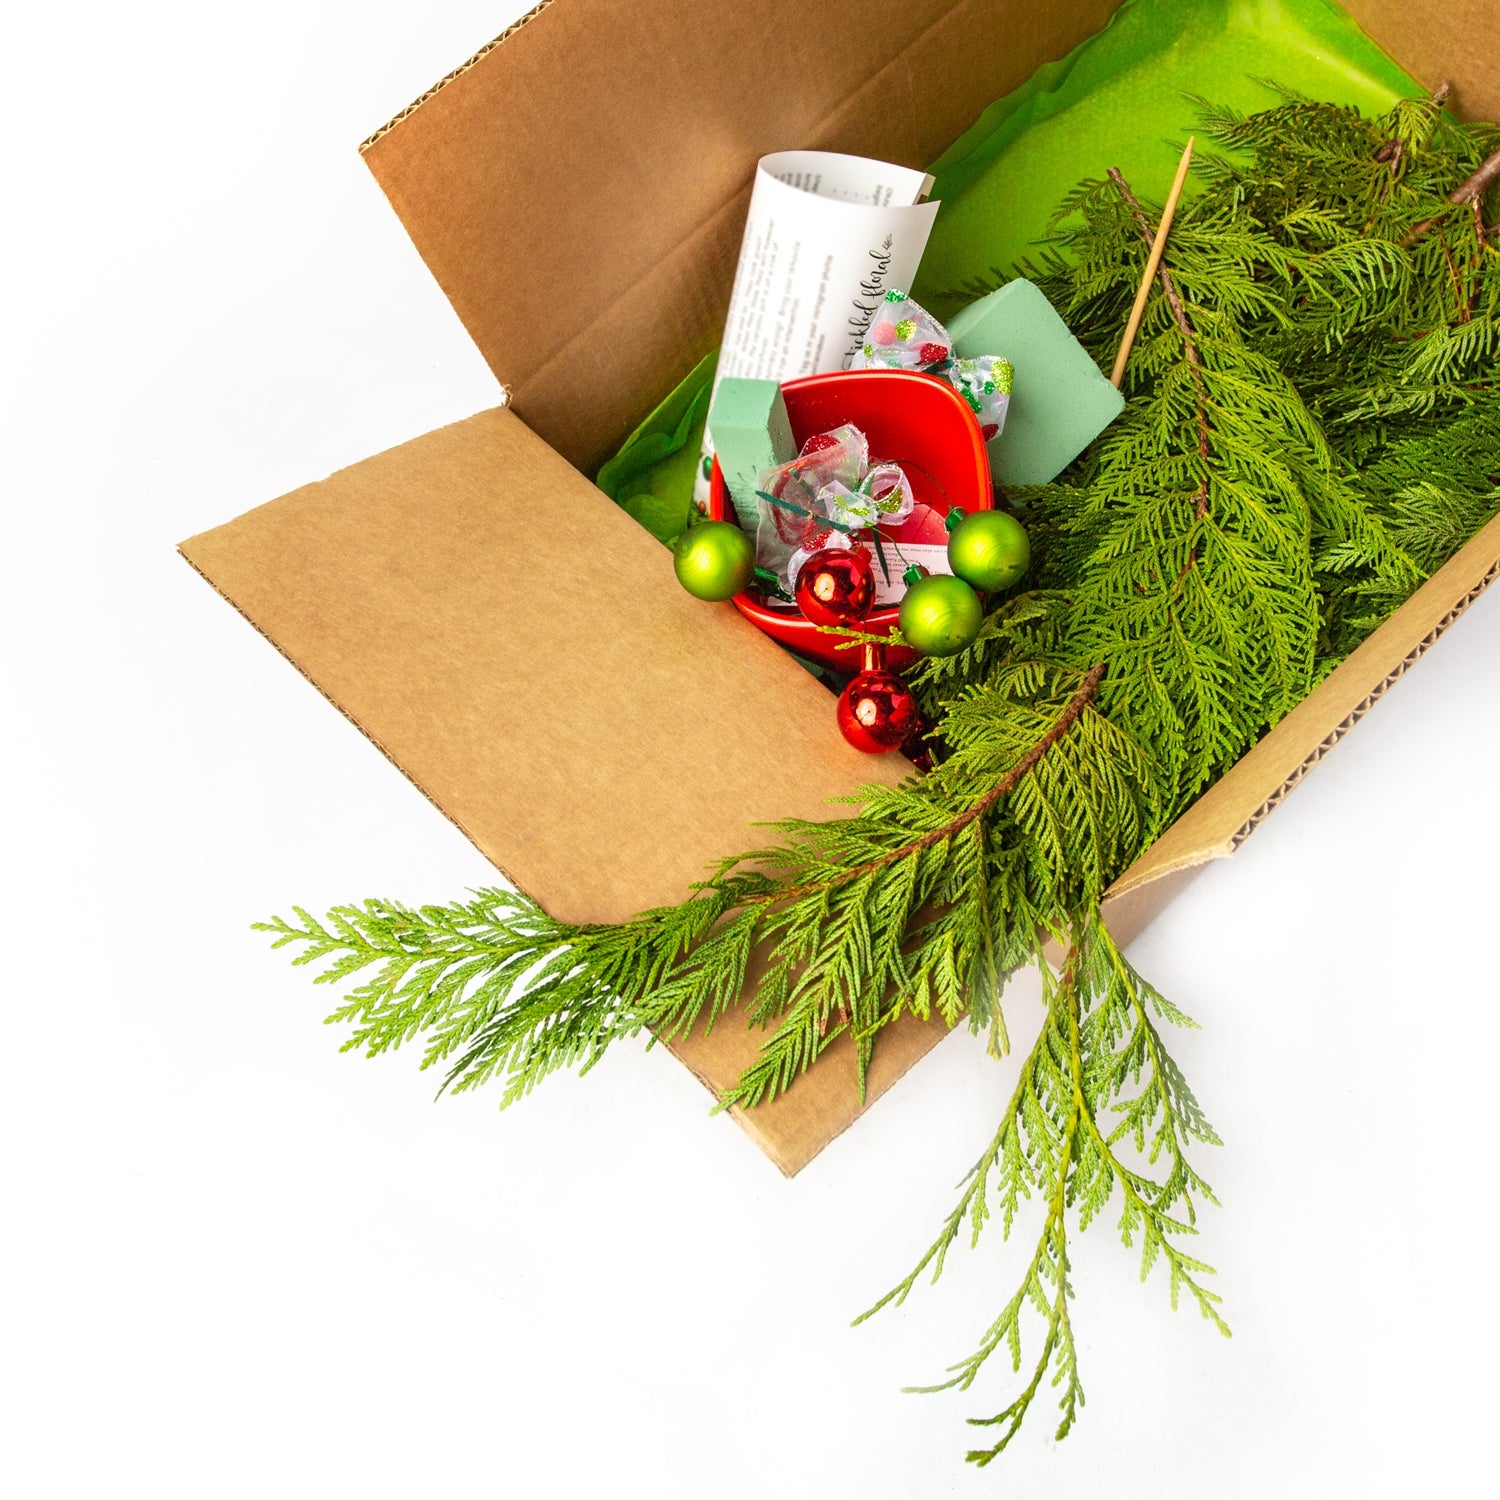 DIY Whoville Tree in a Box - Party Kit for 10 or more